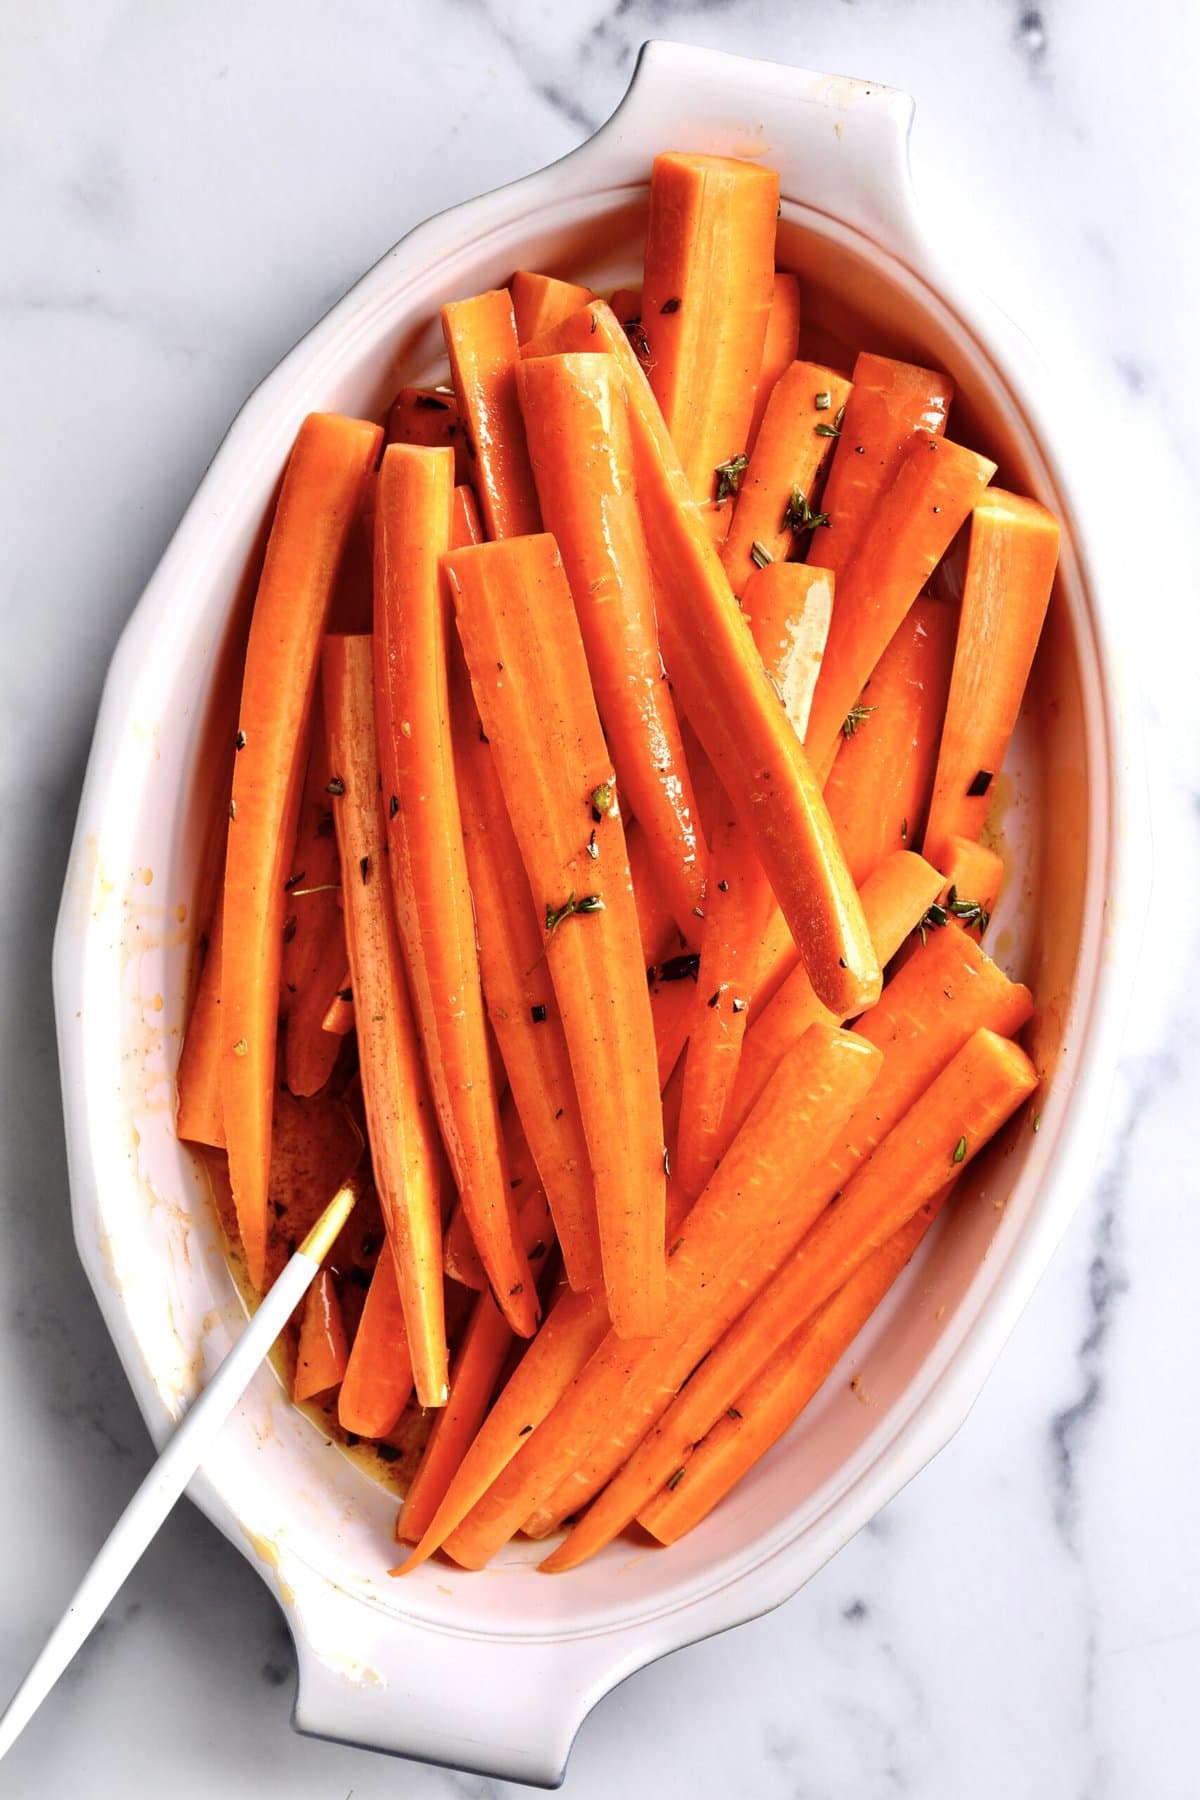 How to makeBest Honey Glazed Carrots Recipe (Oven Roasted)- carrots tossed in glaze in a bowl.